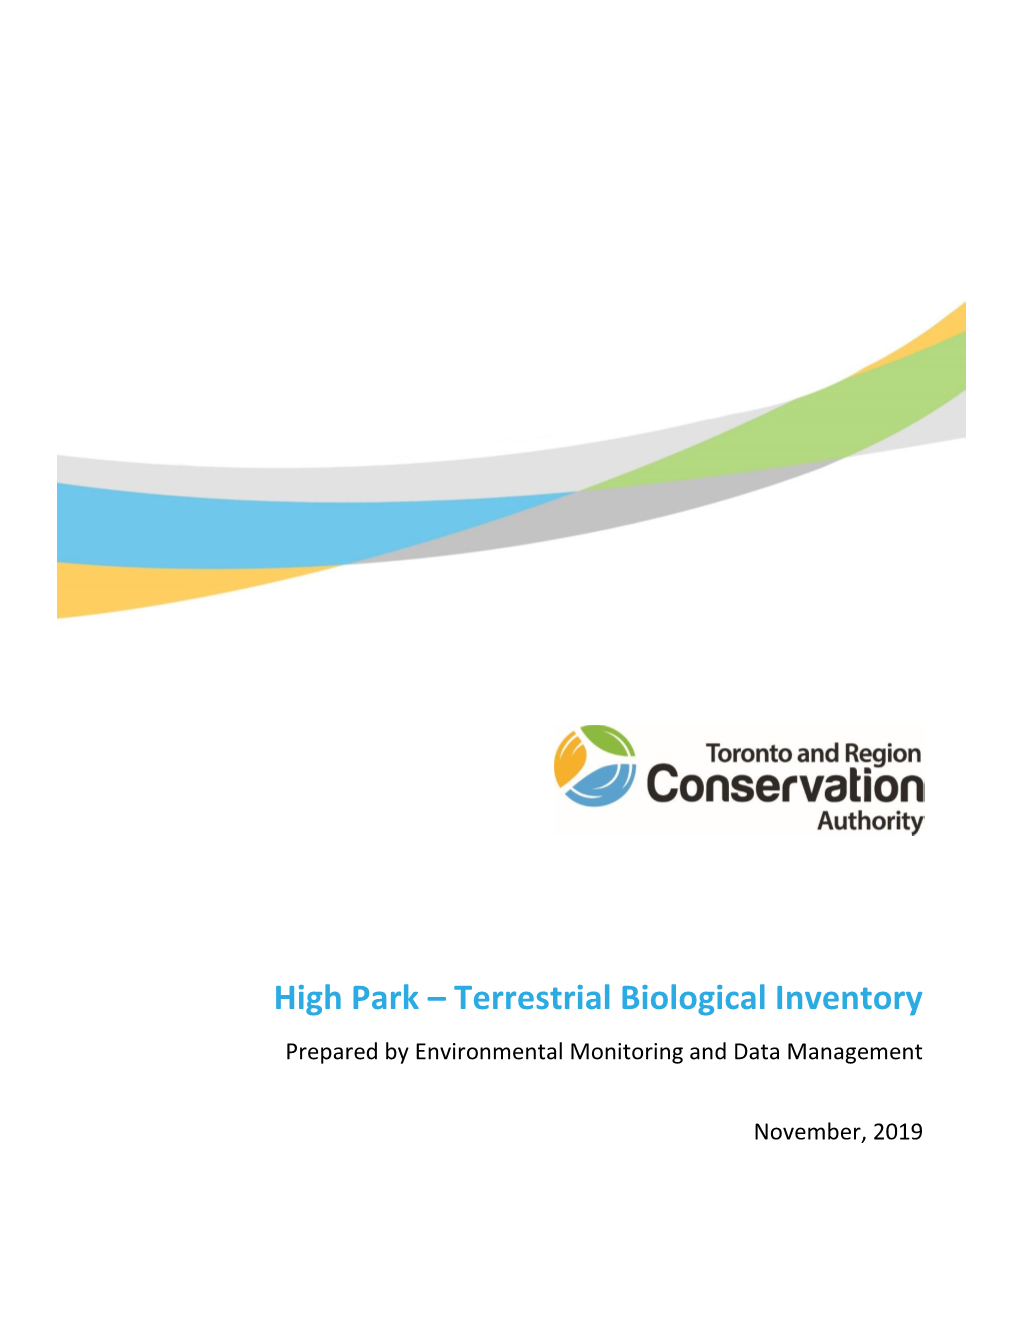 High Park – Terrestrial Biological Inventory Prepared by Environmental Monitoring and Data Management